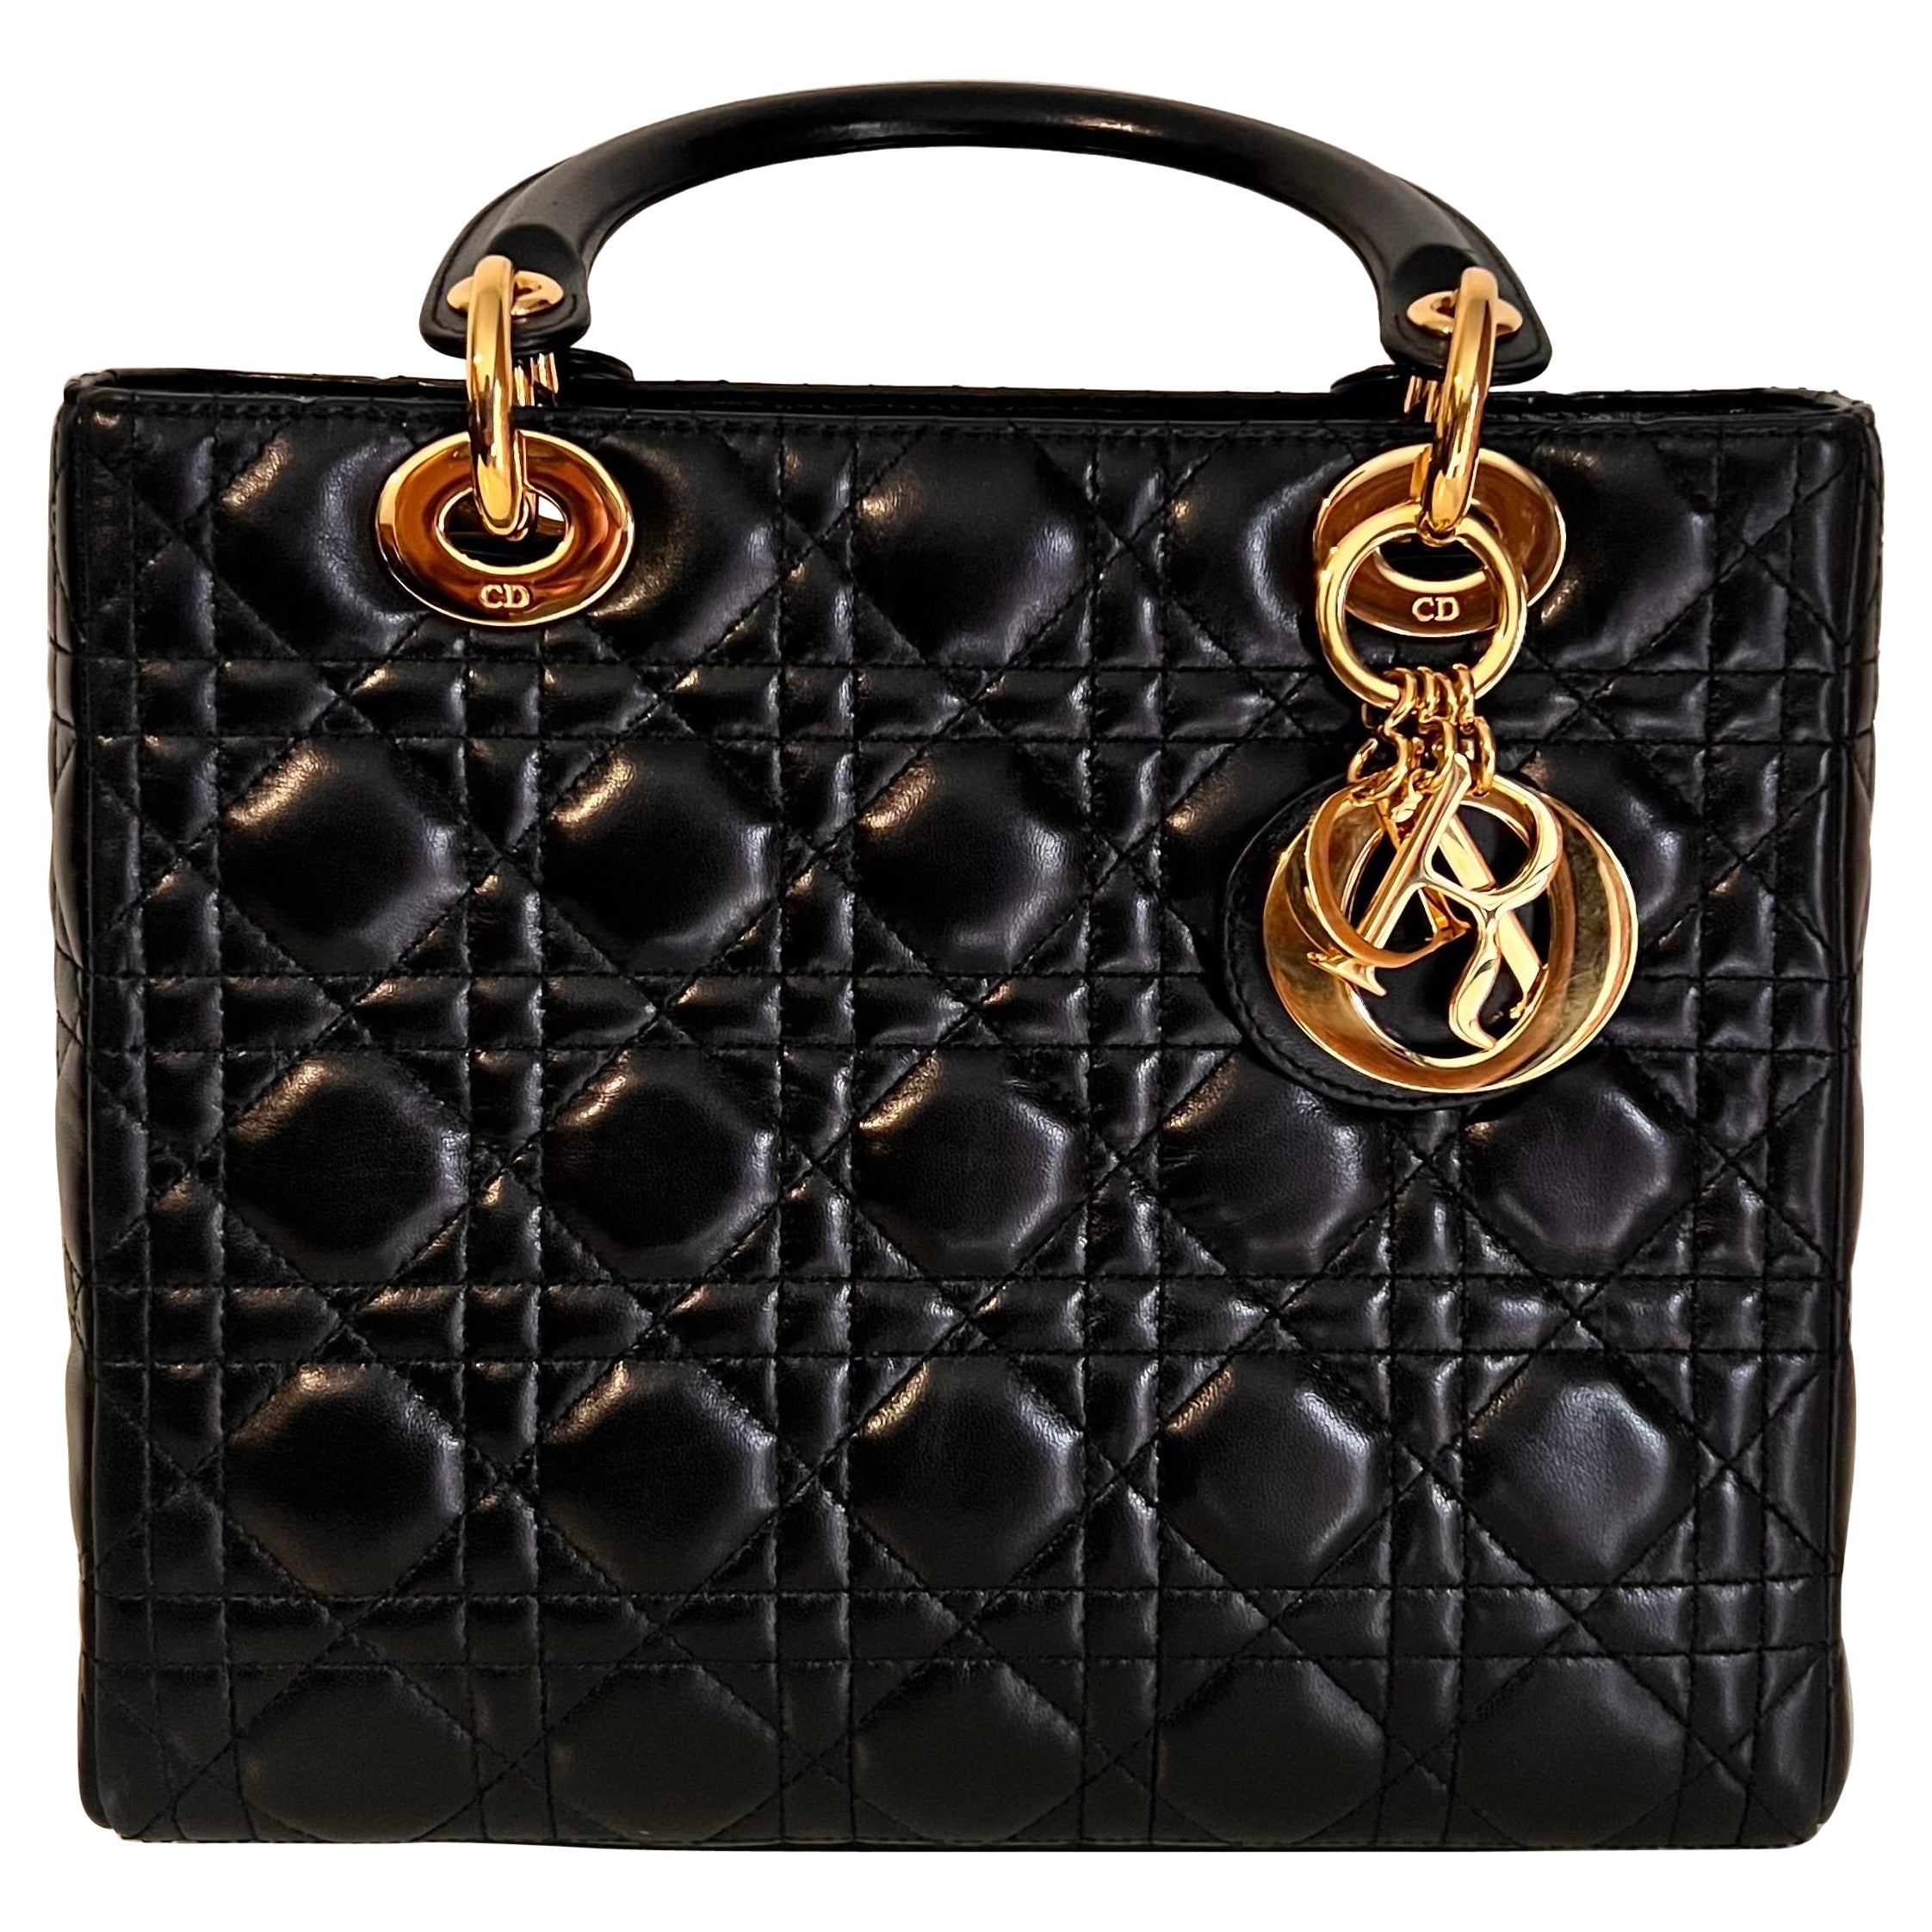 Lady DIOR quilted handbag with gold hardware, famously worn by Princess Diana 